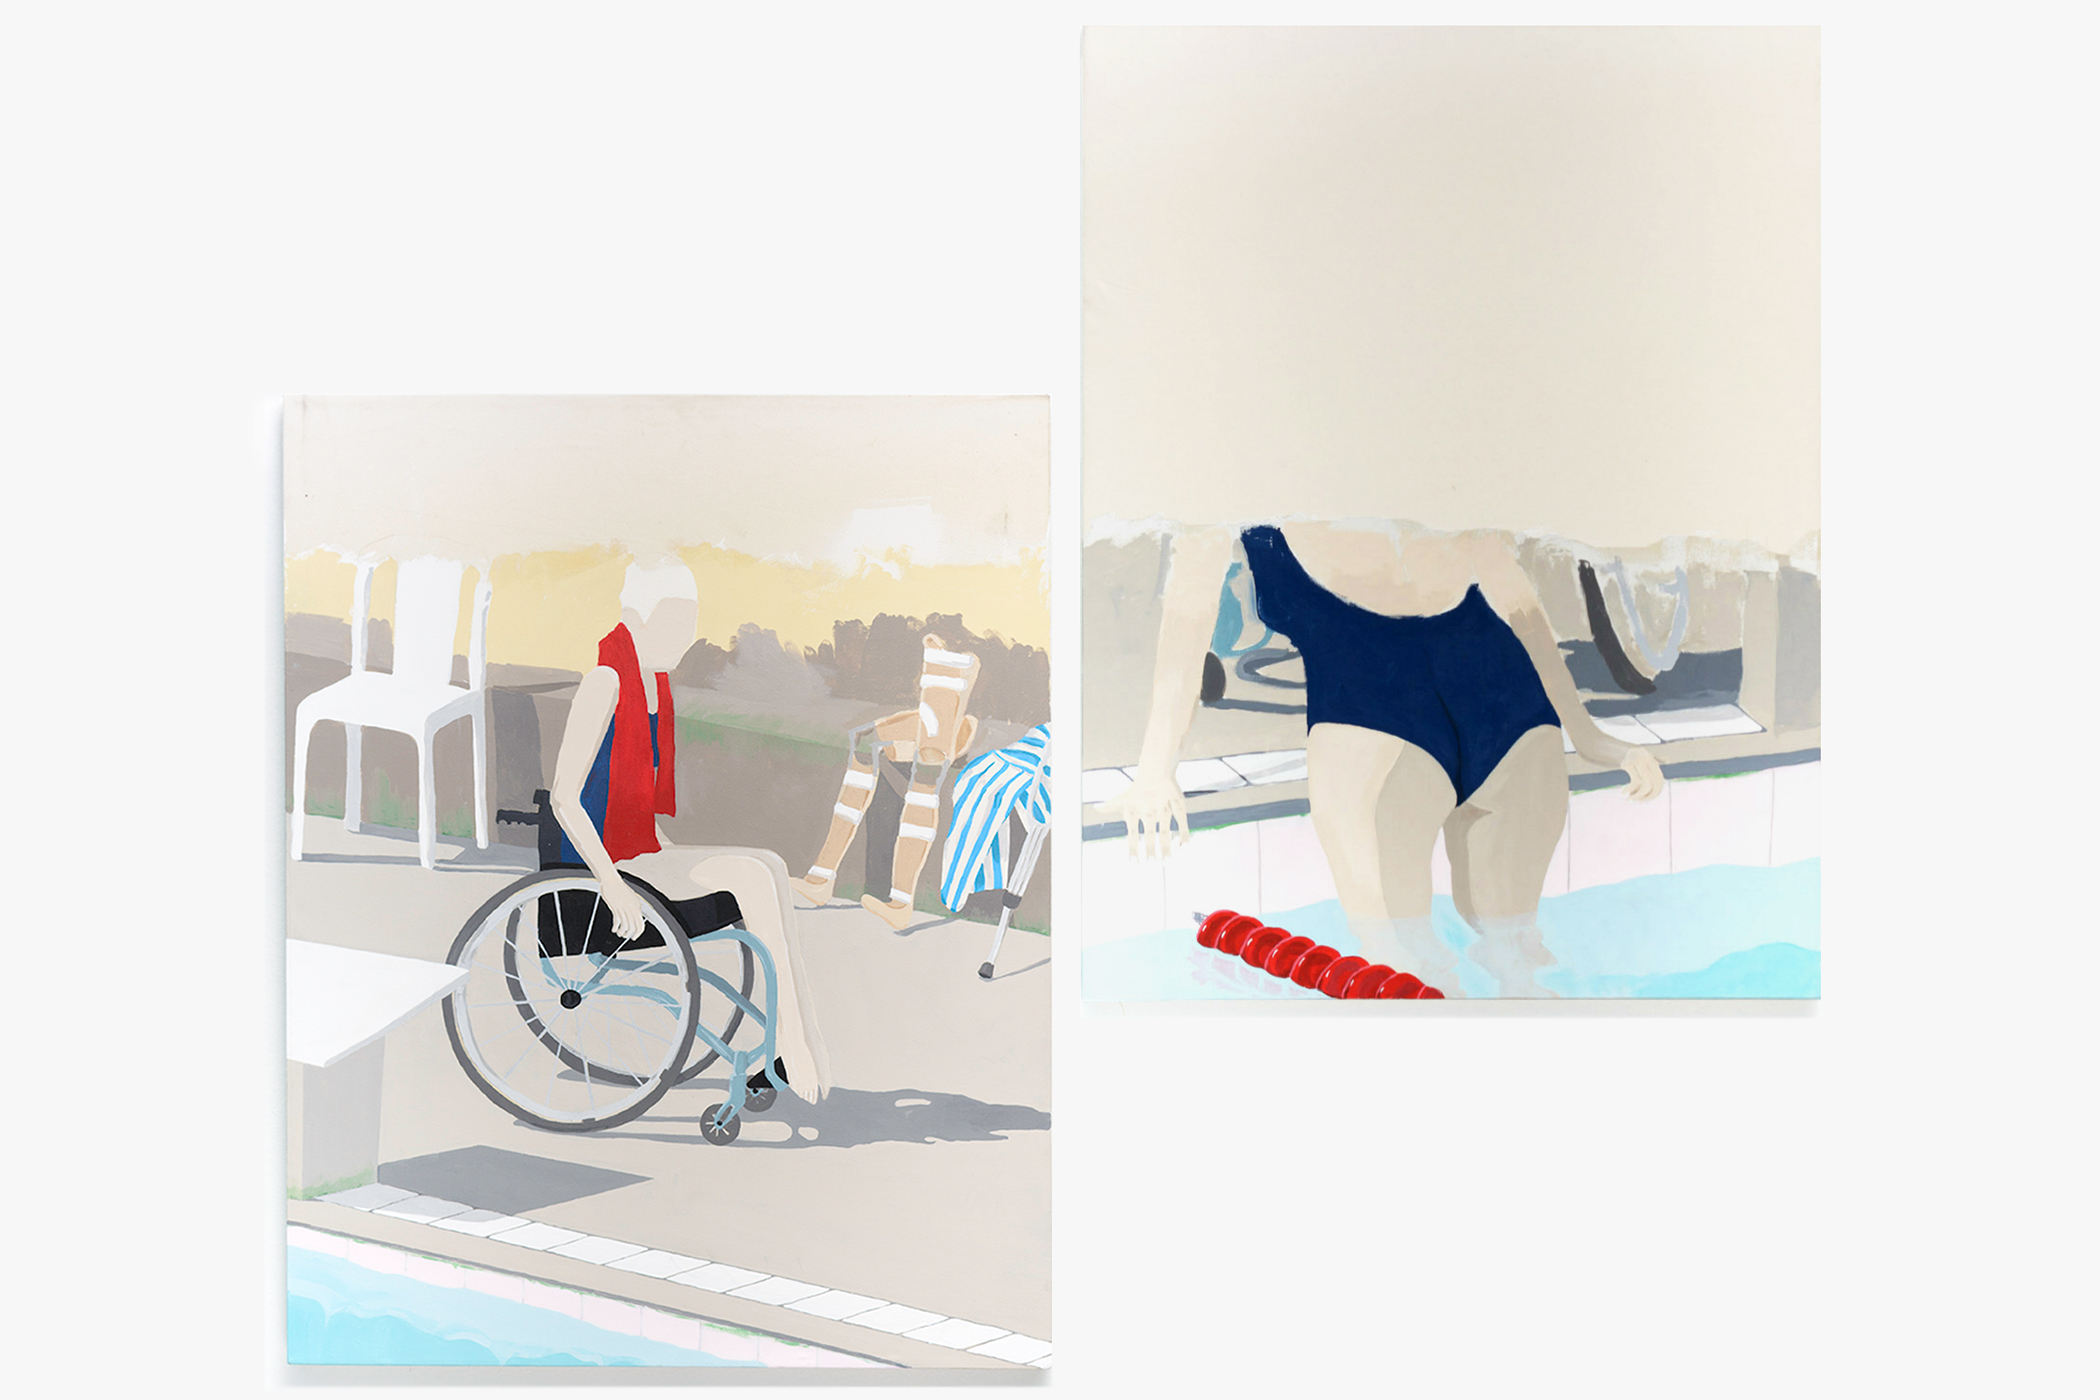 RTwo rectangular acrylic paintings
            hung next to each other. The left painting
            depicts a pale-skinned woman in a manual wheelchair near a pool.
            Behind her, are long leg braces, a striped towel, and an arm
            crutch leaning on a bench. The painted part of the canvas ends in an
            irregular, uneven line about 40 inches up from the bottom, with the
            top 8 inches left as raw, unprimed and unpainted canvas. The right
            painting has this same irregular line with raw
            canvas above it, but the division between the painted and unpainted
            parts happens about 20 inches up from the bottom. The right painting
            depicts the same woman lifting her body out of the pool with her back towards us.
            The bottom part of her wheelchair is visible on the pool deck. The two paintings are hung staggered next to each so that the
            ragged lines and unpainted raw canvas parts line up.